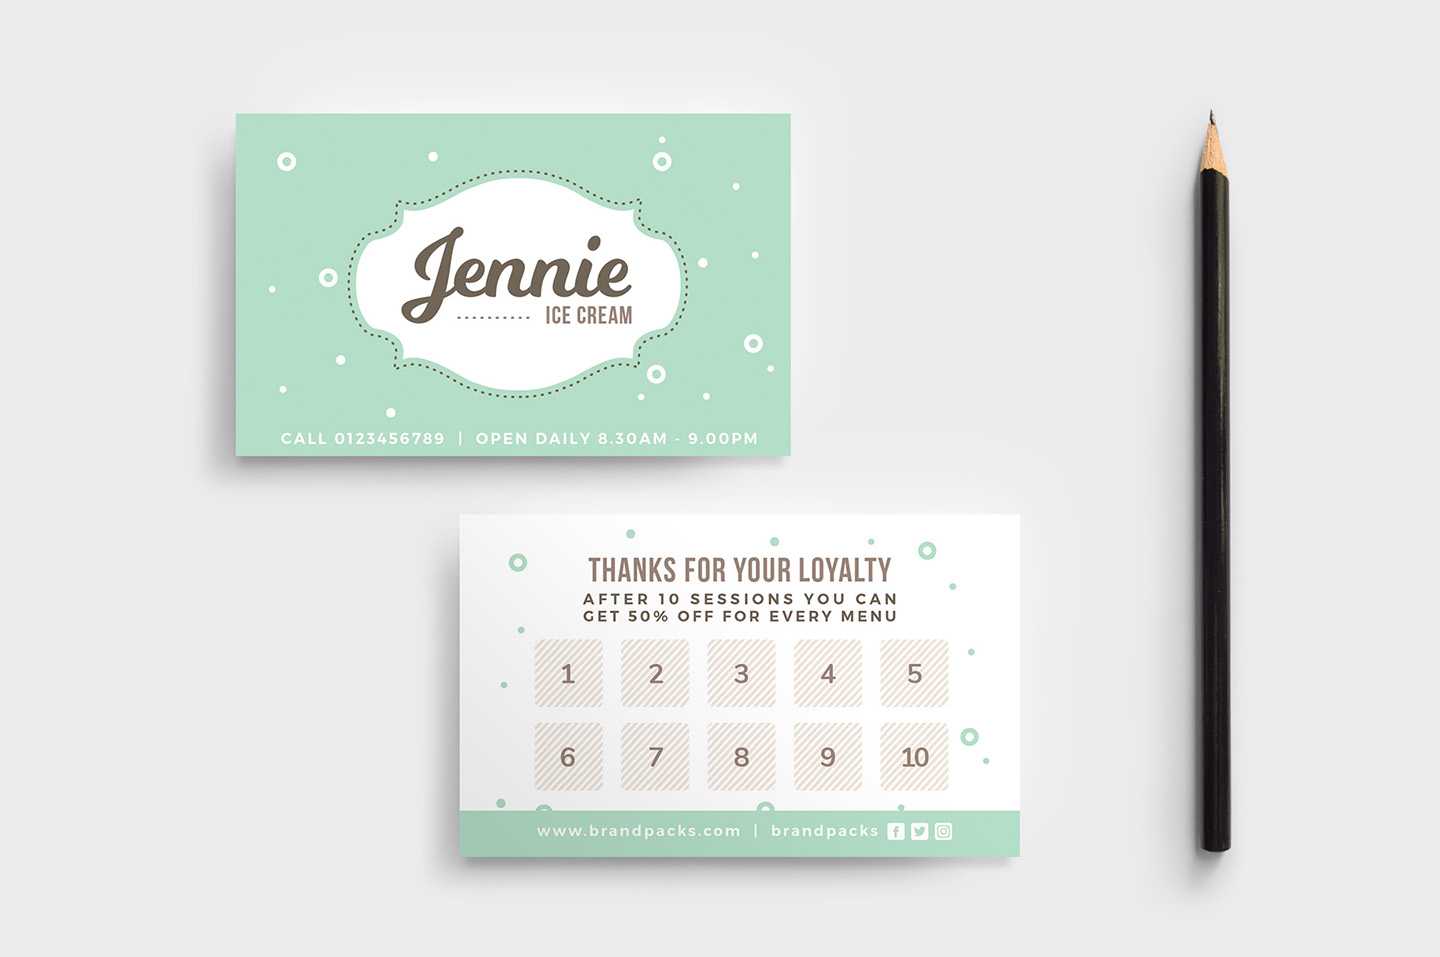 Free Loyalty Card Templates - Psd, Ai & Vector - Brandpacks Within Business Punch Card Template Free